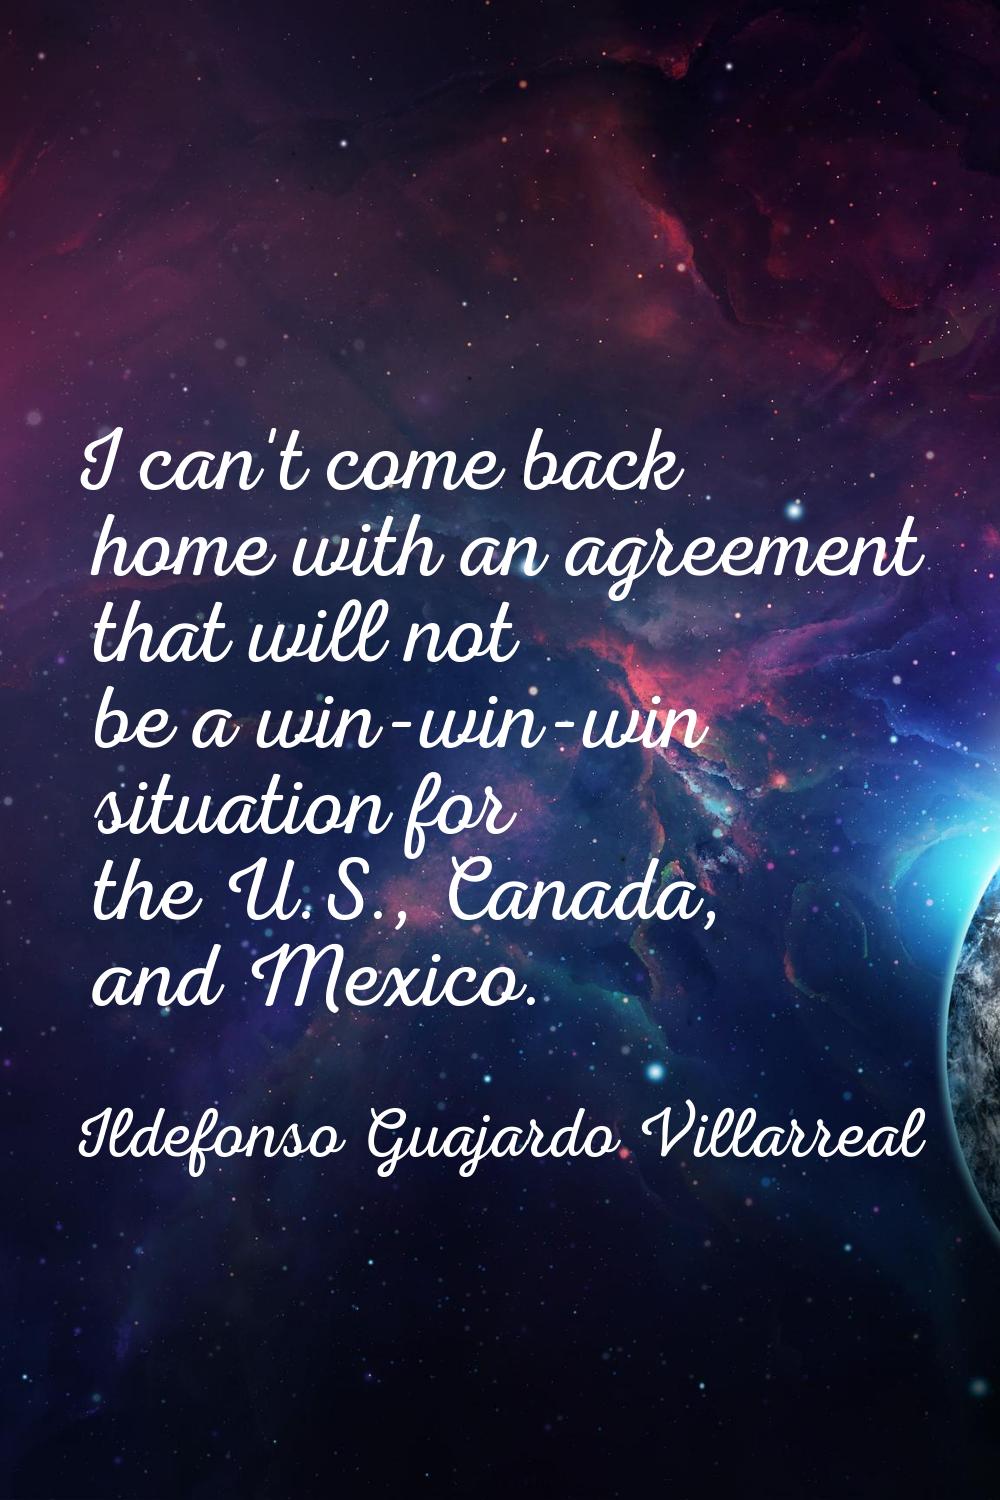 I can't come back home with an agreement that will not be a win-win-win situation for the U.S., Can